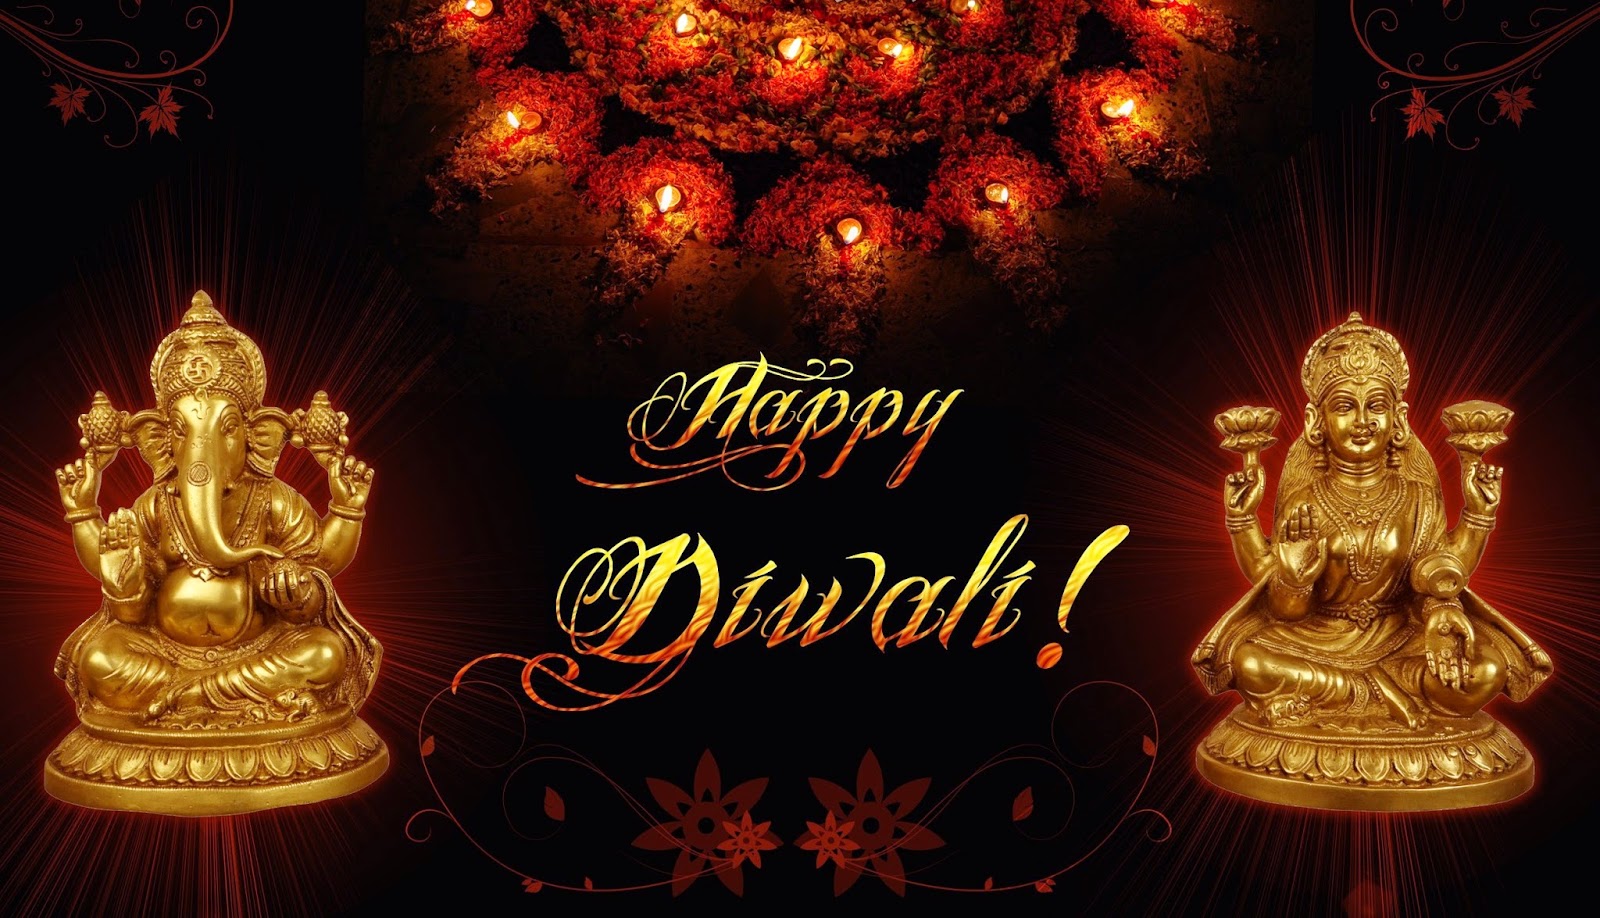 Diwali 2014 Latest Wallpapers Download For Mobile And - Diwali Image Download Hd , HD Wallpaper & Backgrounds